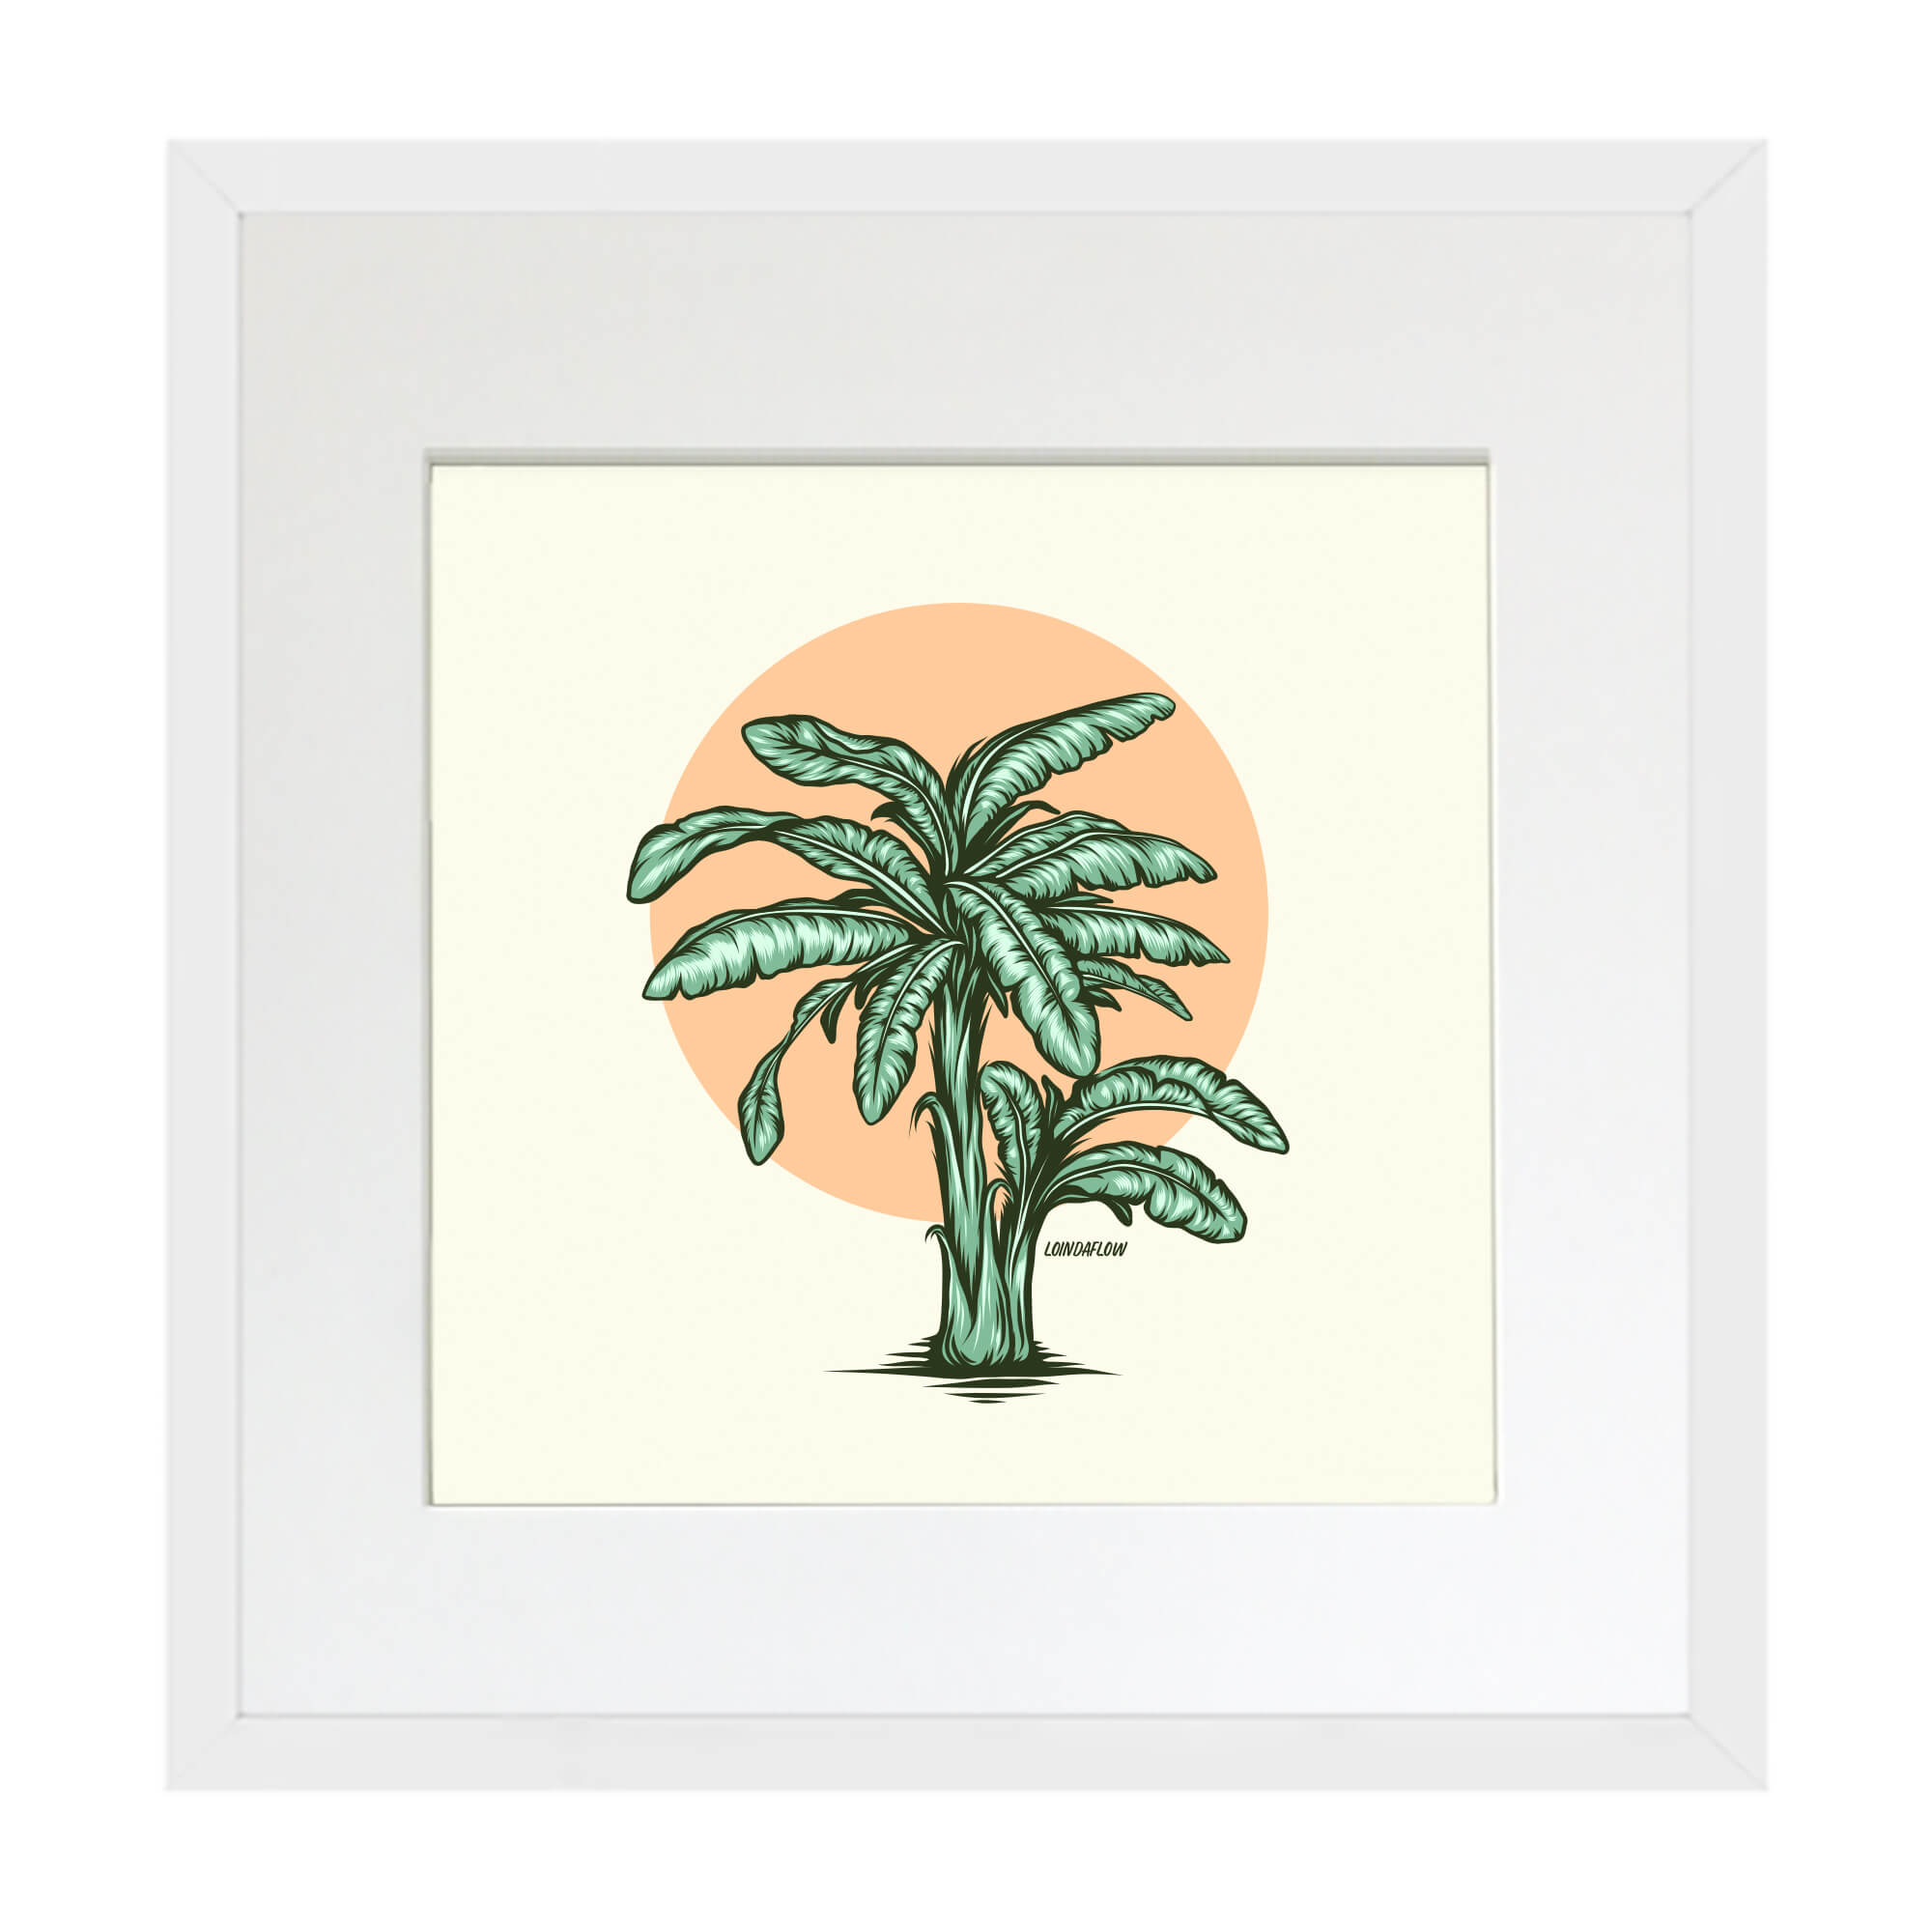 Matted art print with white frame of a banana tree by Hawaii artist Laihha Organna